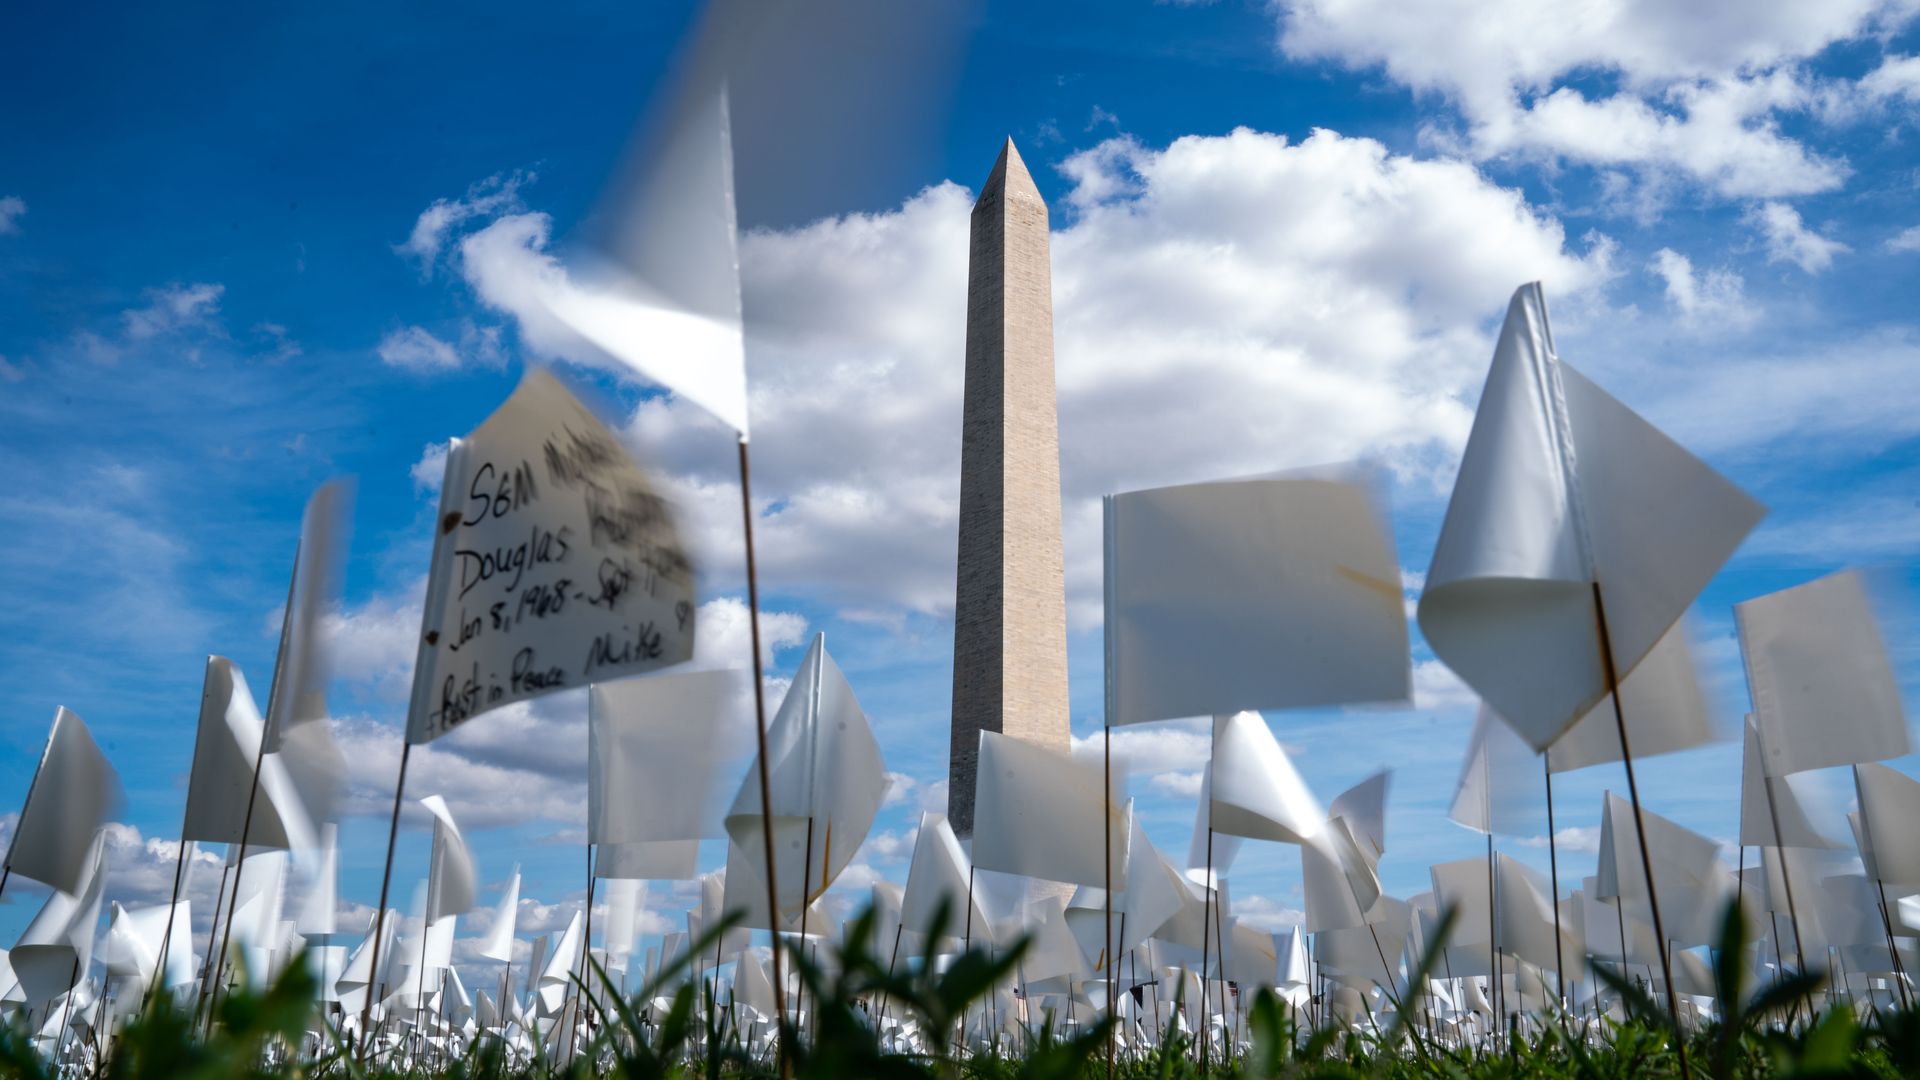 Thousands of mini white flags (dozens in view) are planted in the National Mall, with the Washington Monument in the background.